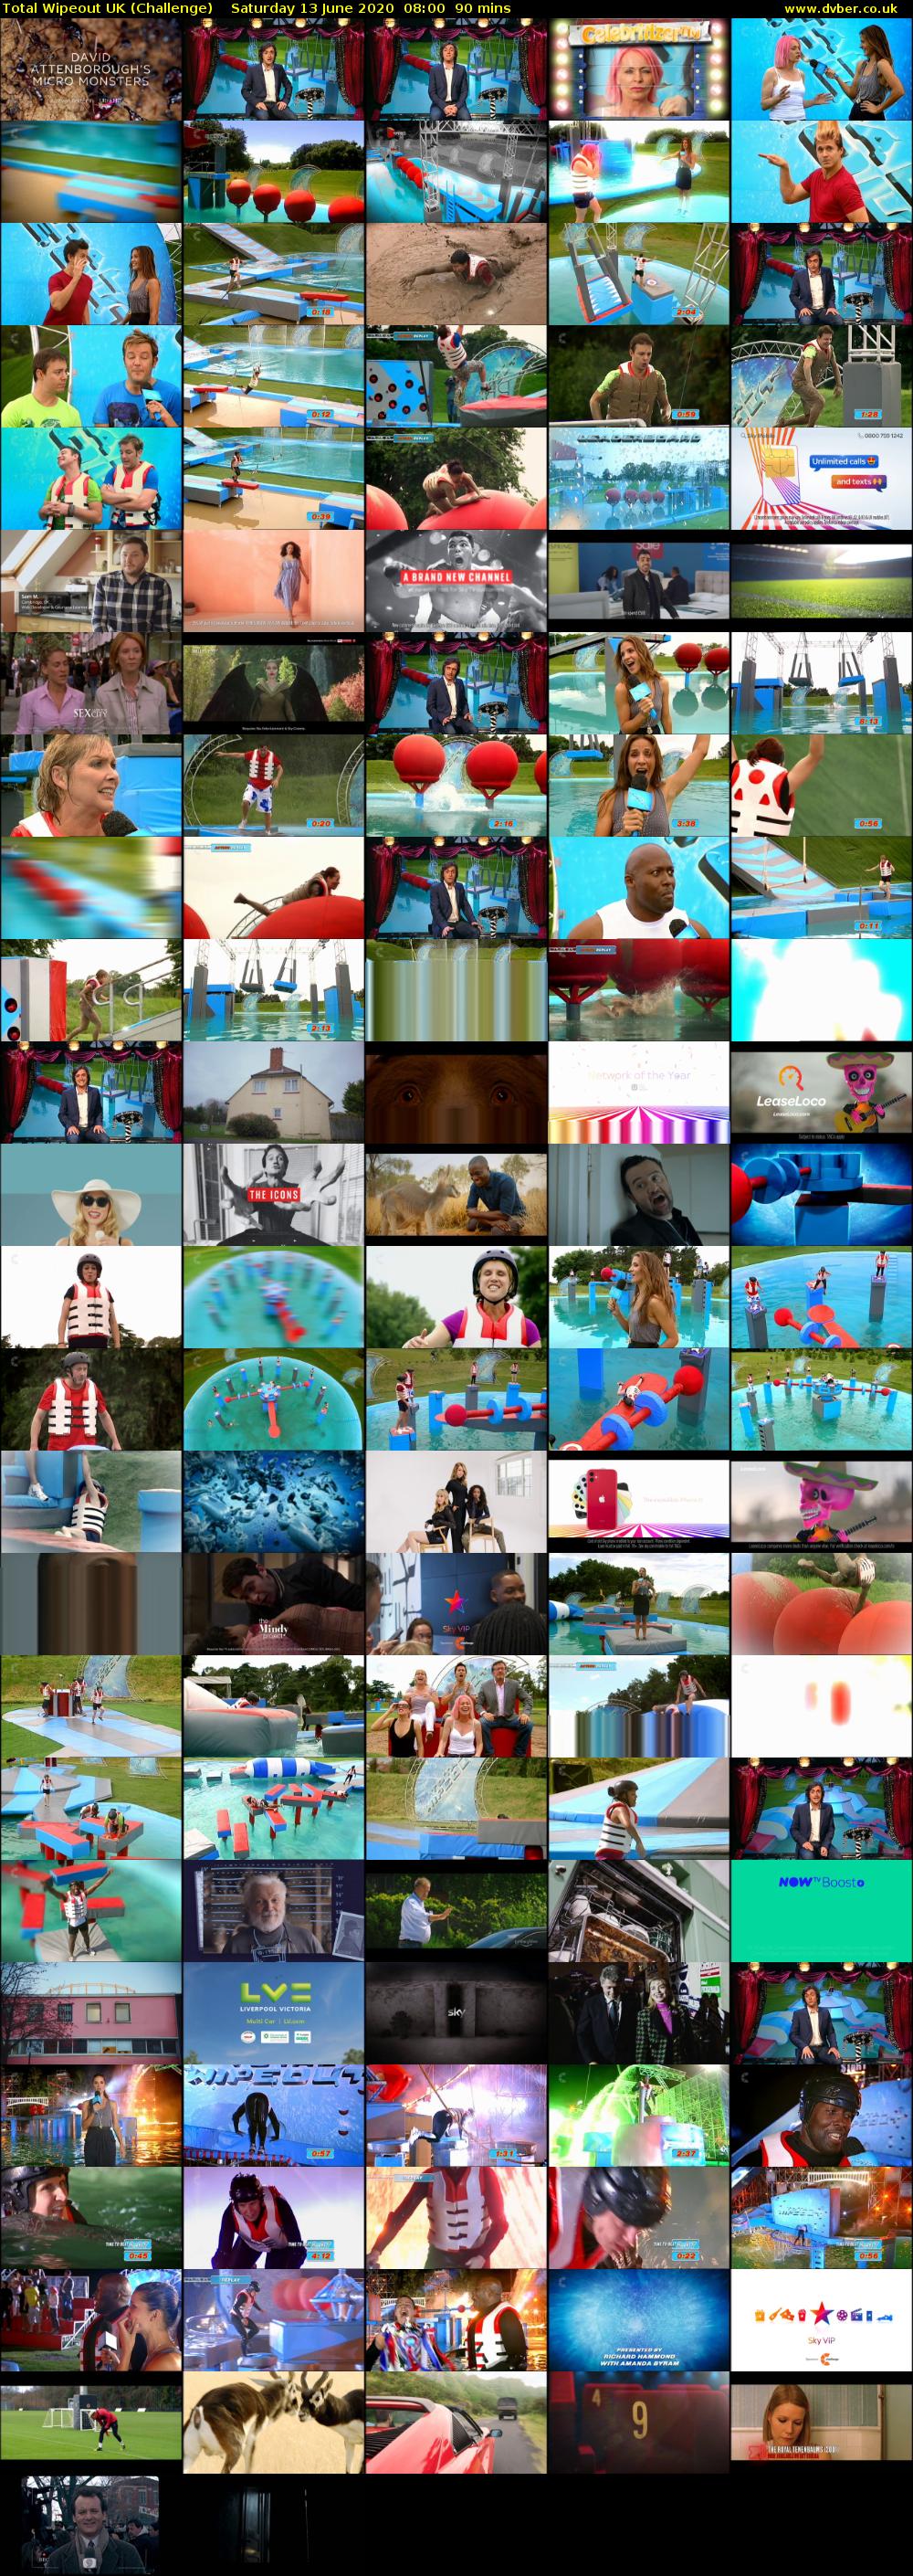 Total Wipeout UK (Challenge) Saturday 13 June 2020 08:00 - 09:30